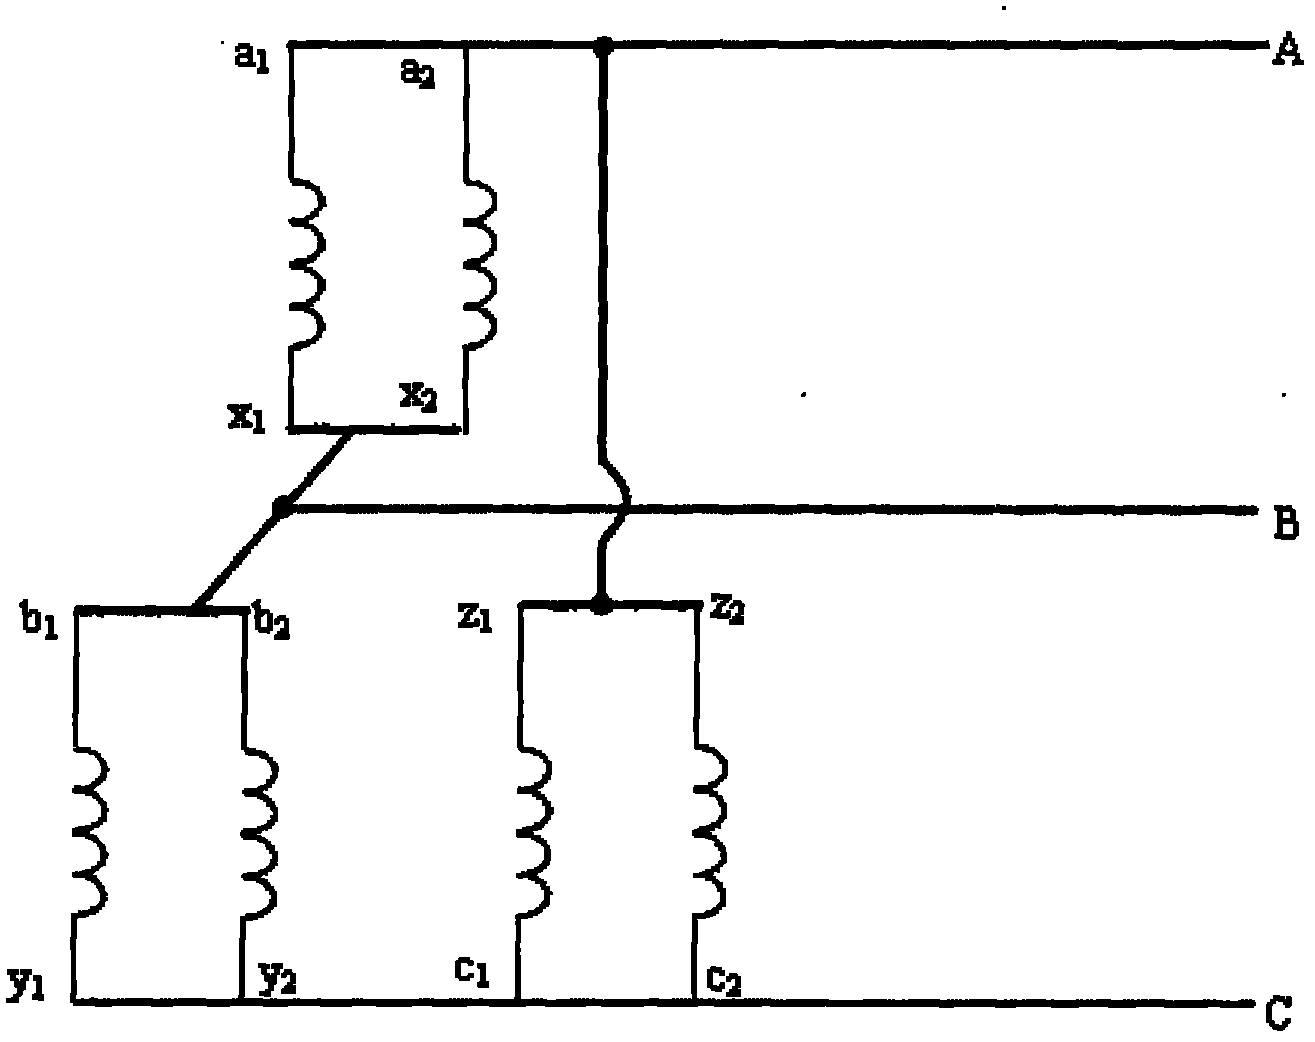 Variable-speed three-phase asynchronous motor